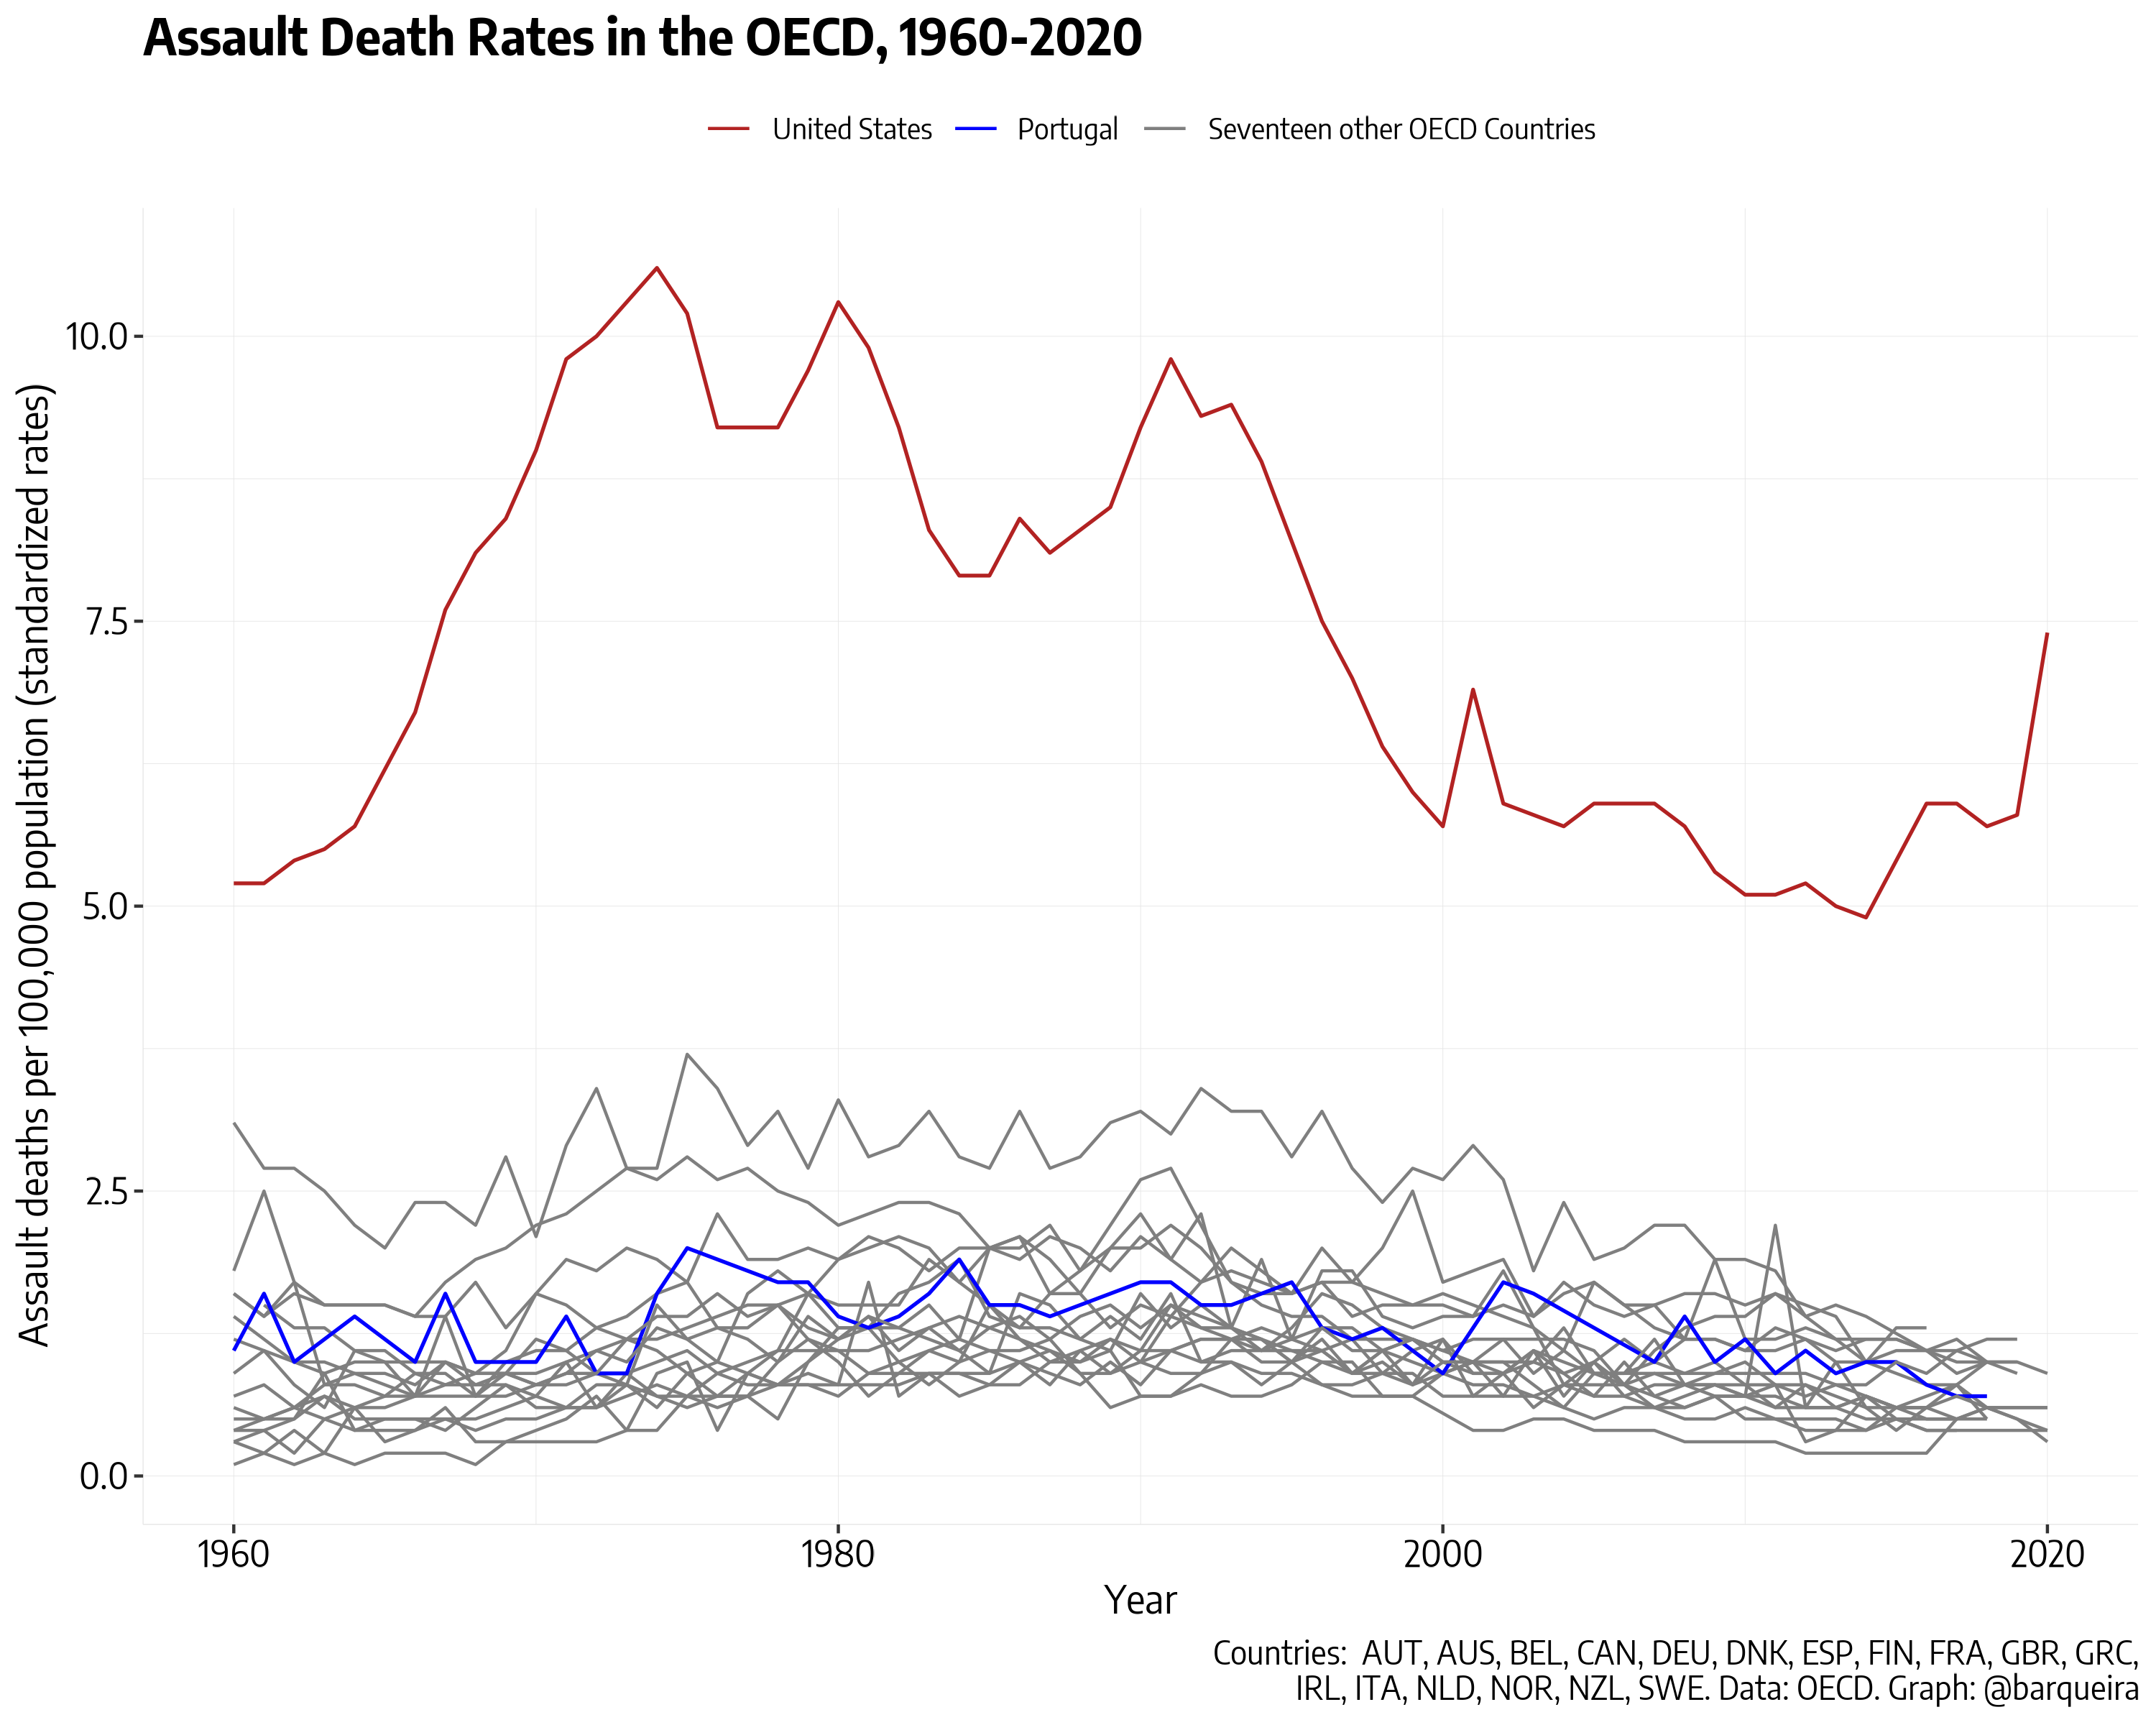 Time series of Assault Deaths in the OECD